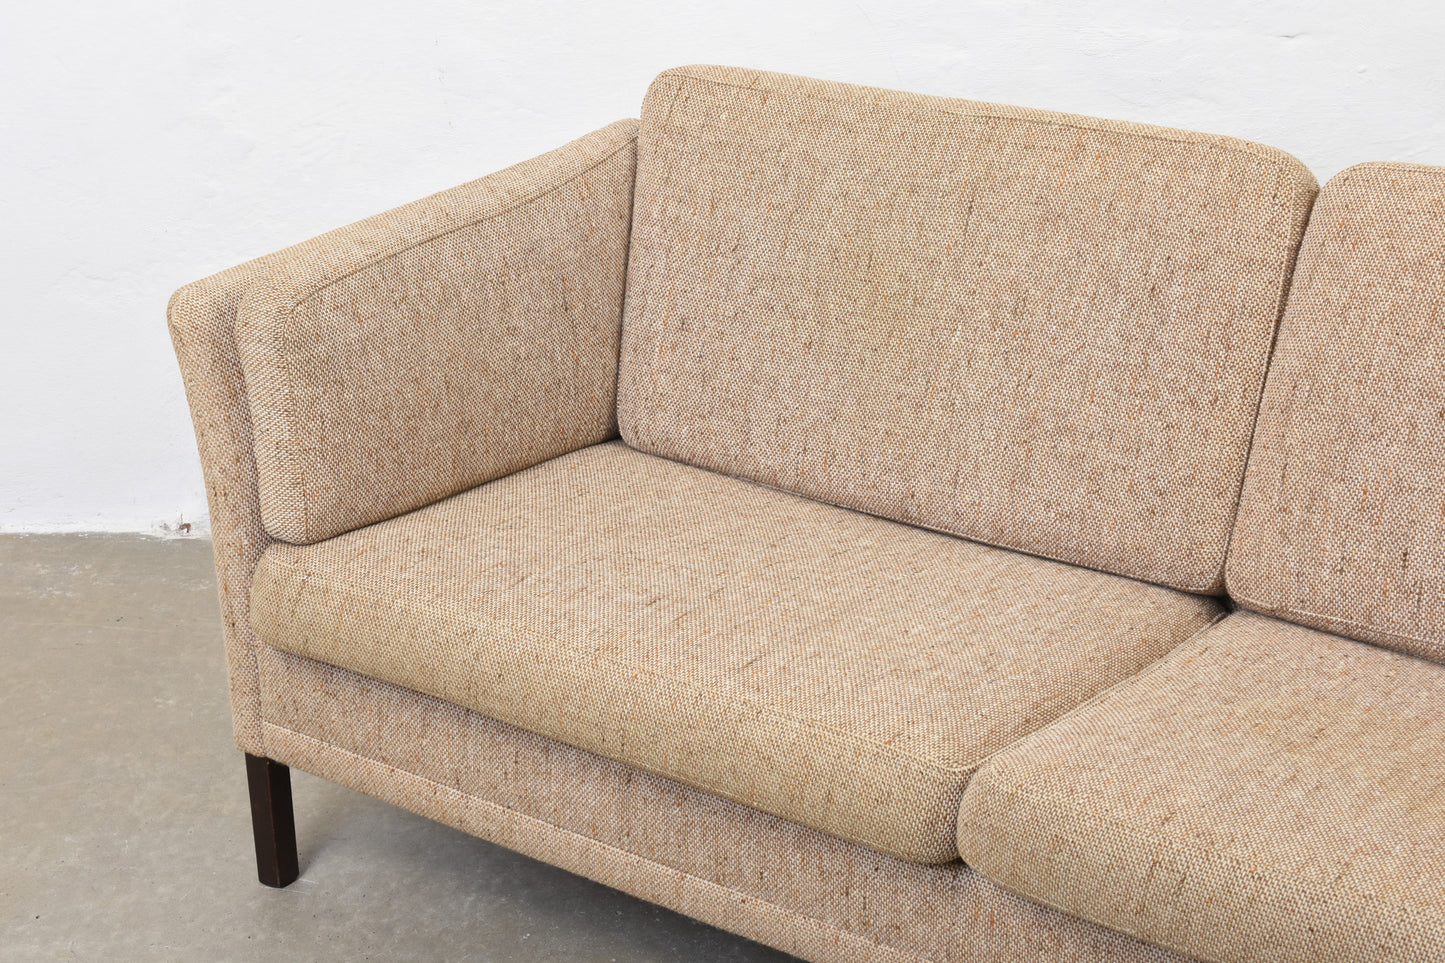 1980s Danish wool two and a half seater